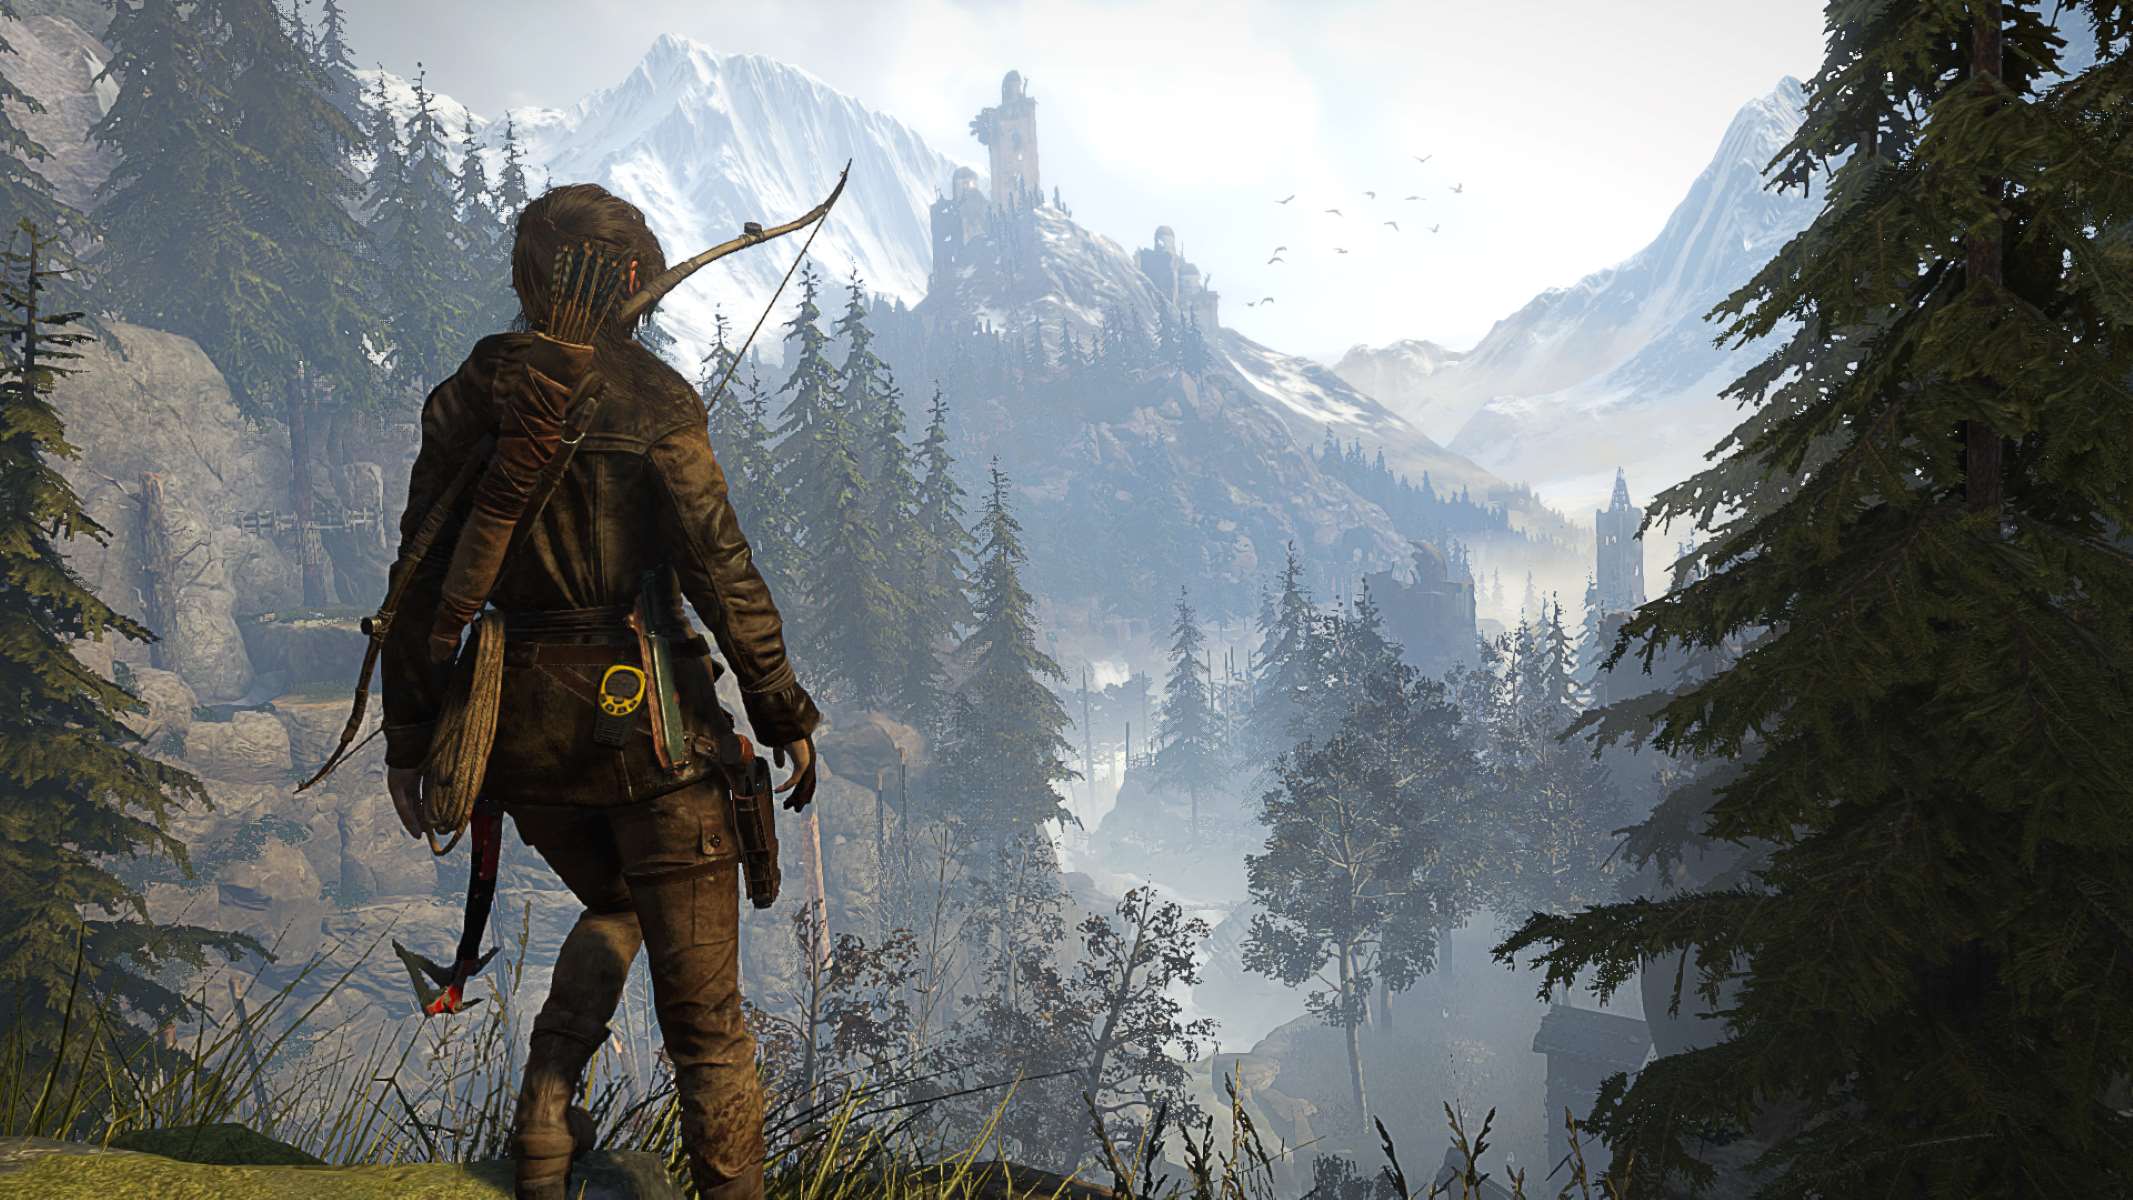 What PC Game Controller To Use With Rise Of The Tomb Raider